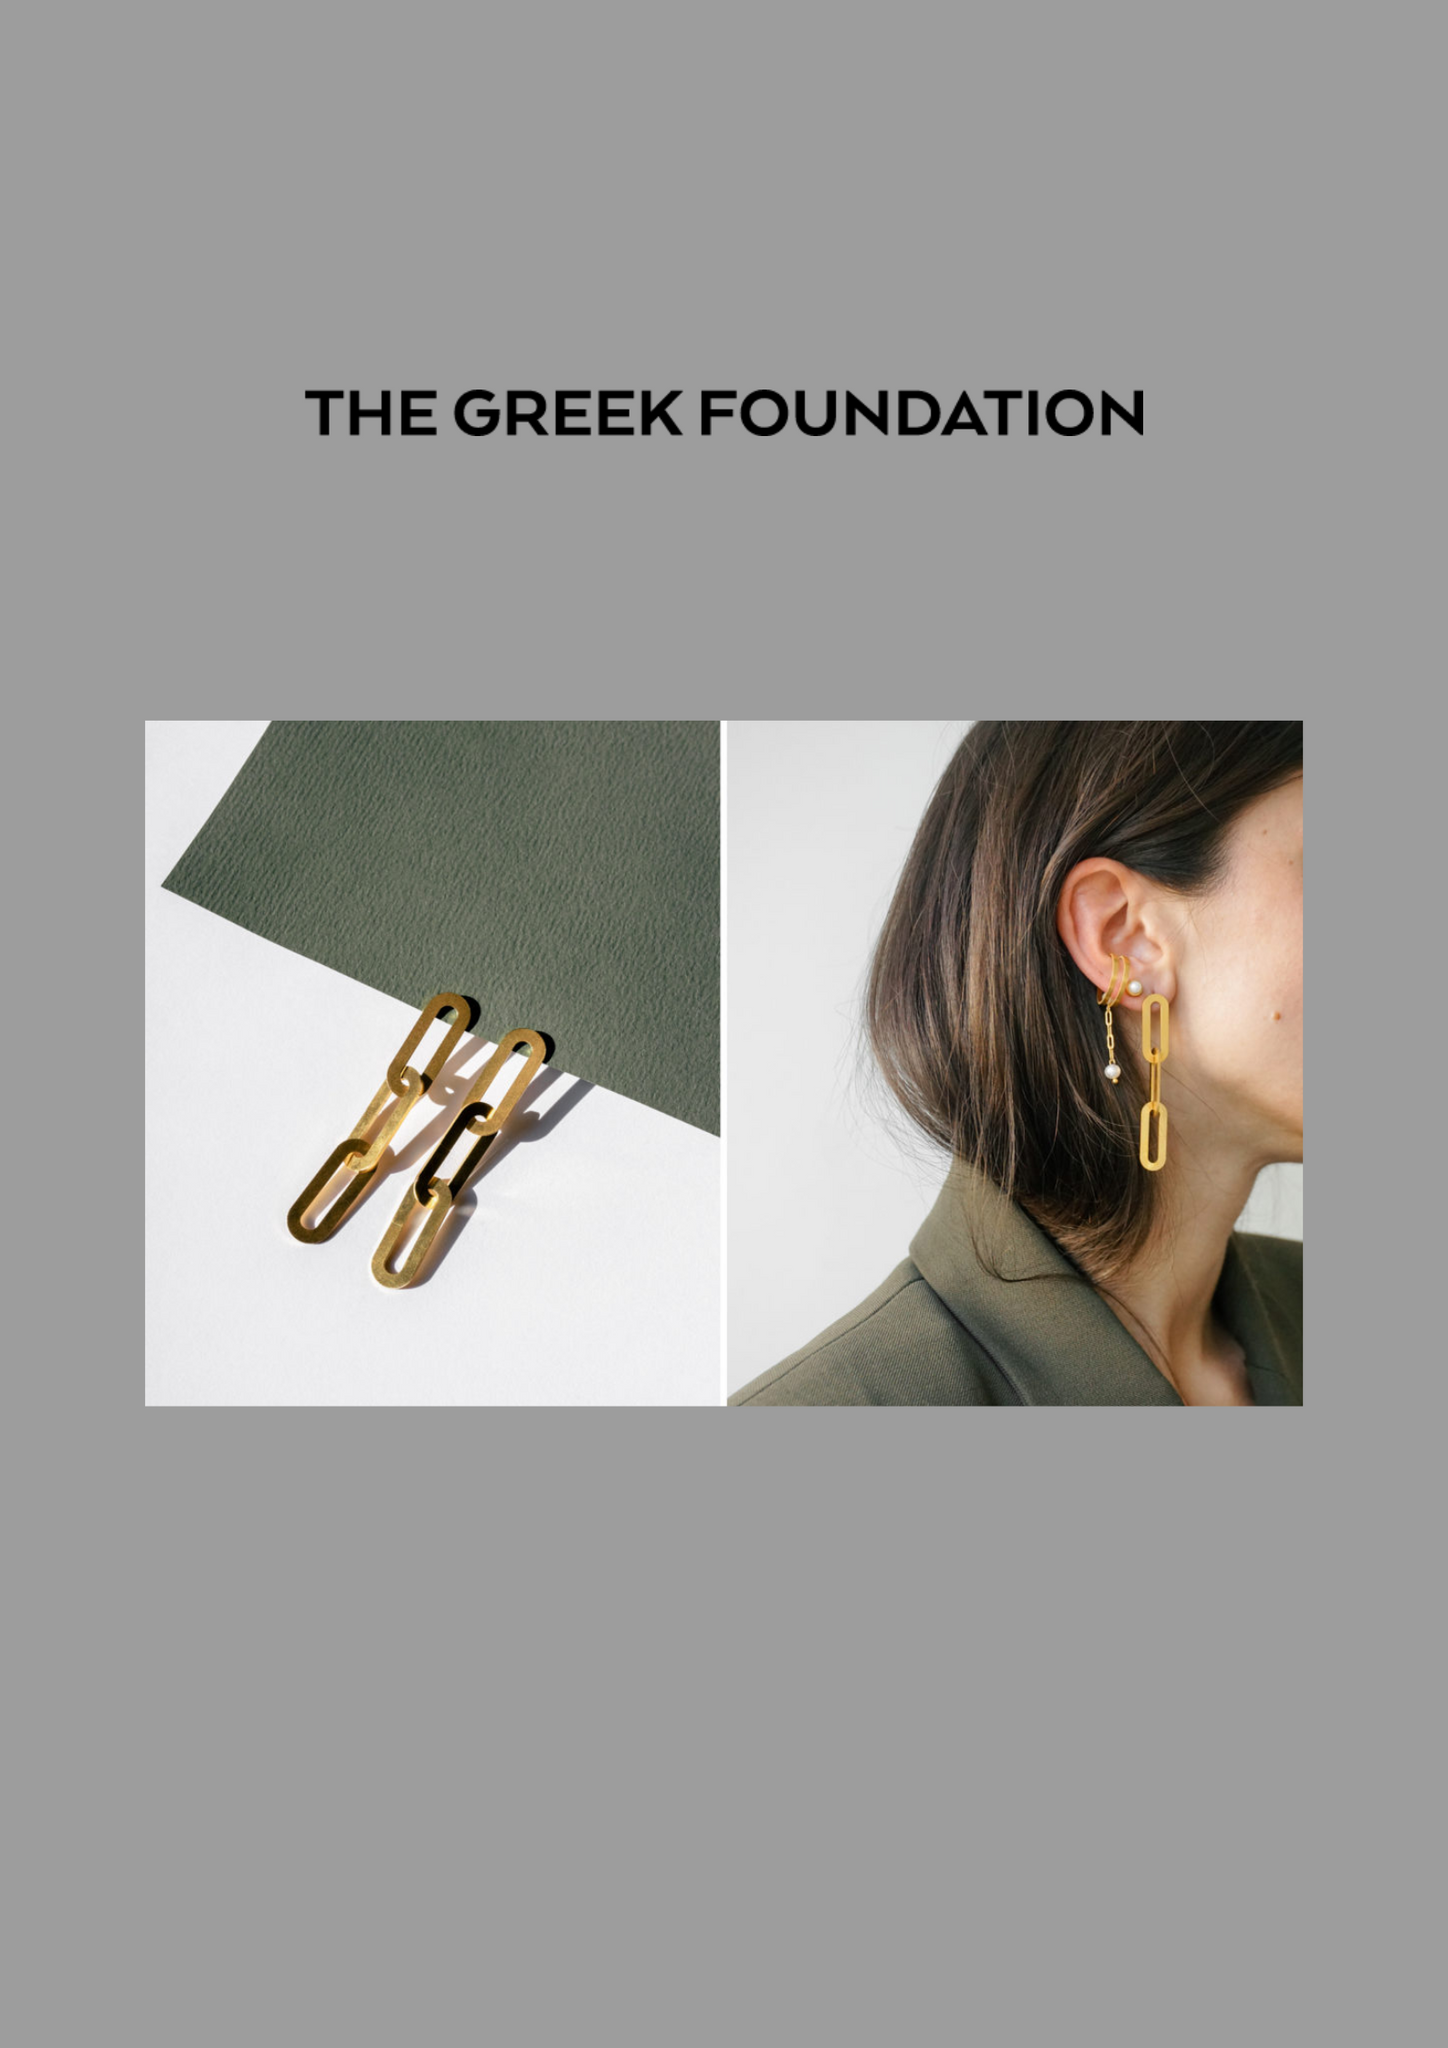 Anna Rosa Moschouti x The Greek Foundation "Unity Collection"